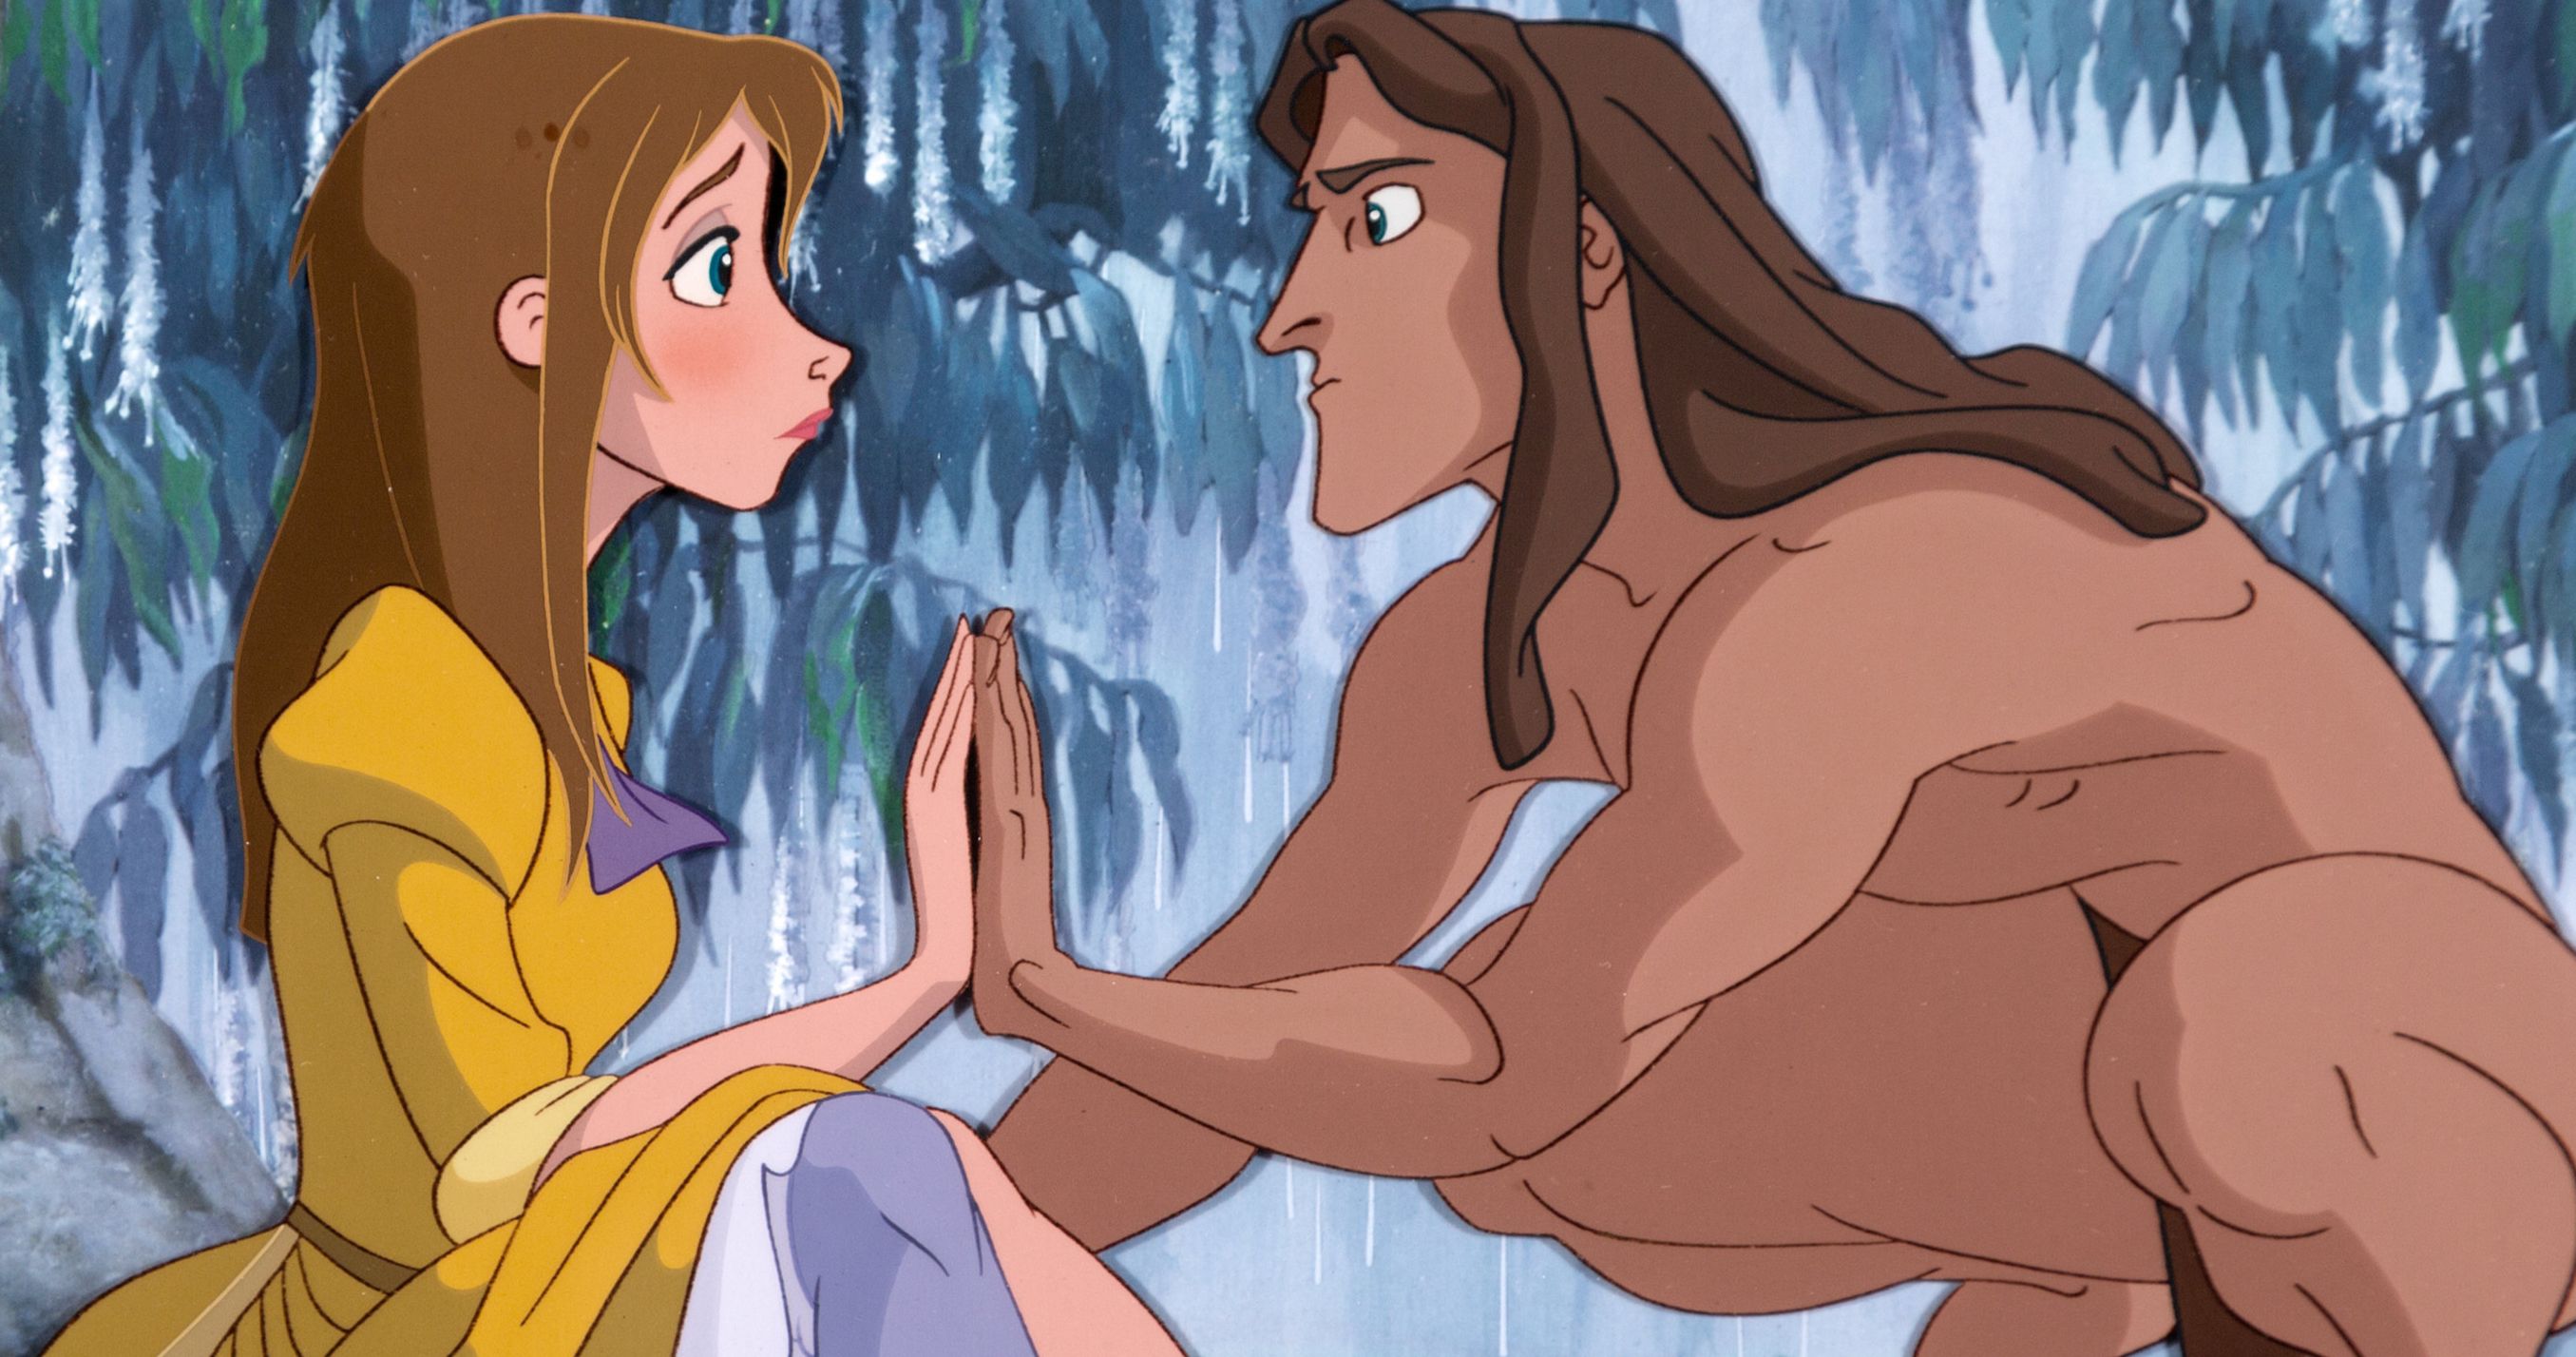 Will Disney's Tarzan Get a Live-Action Remake After Hercules?